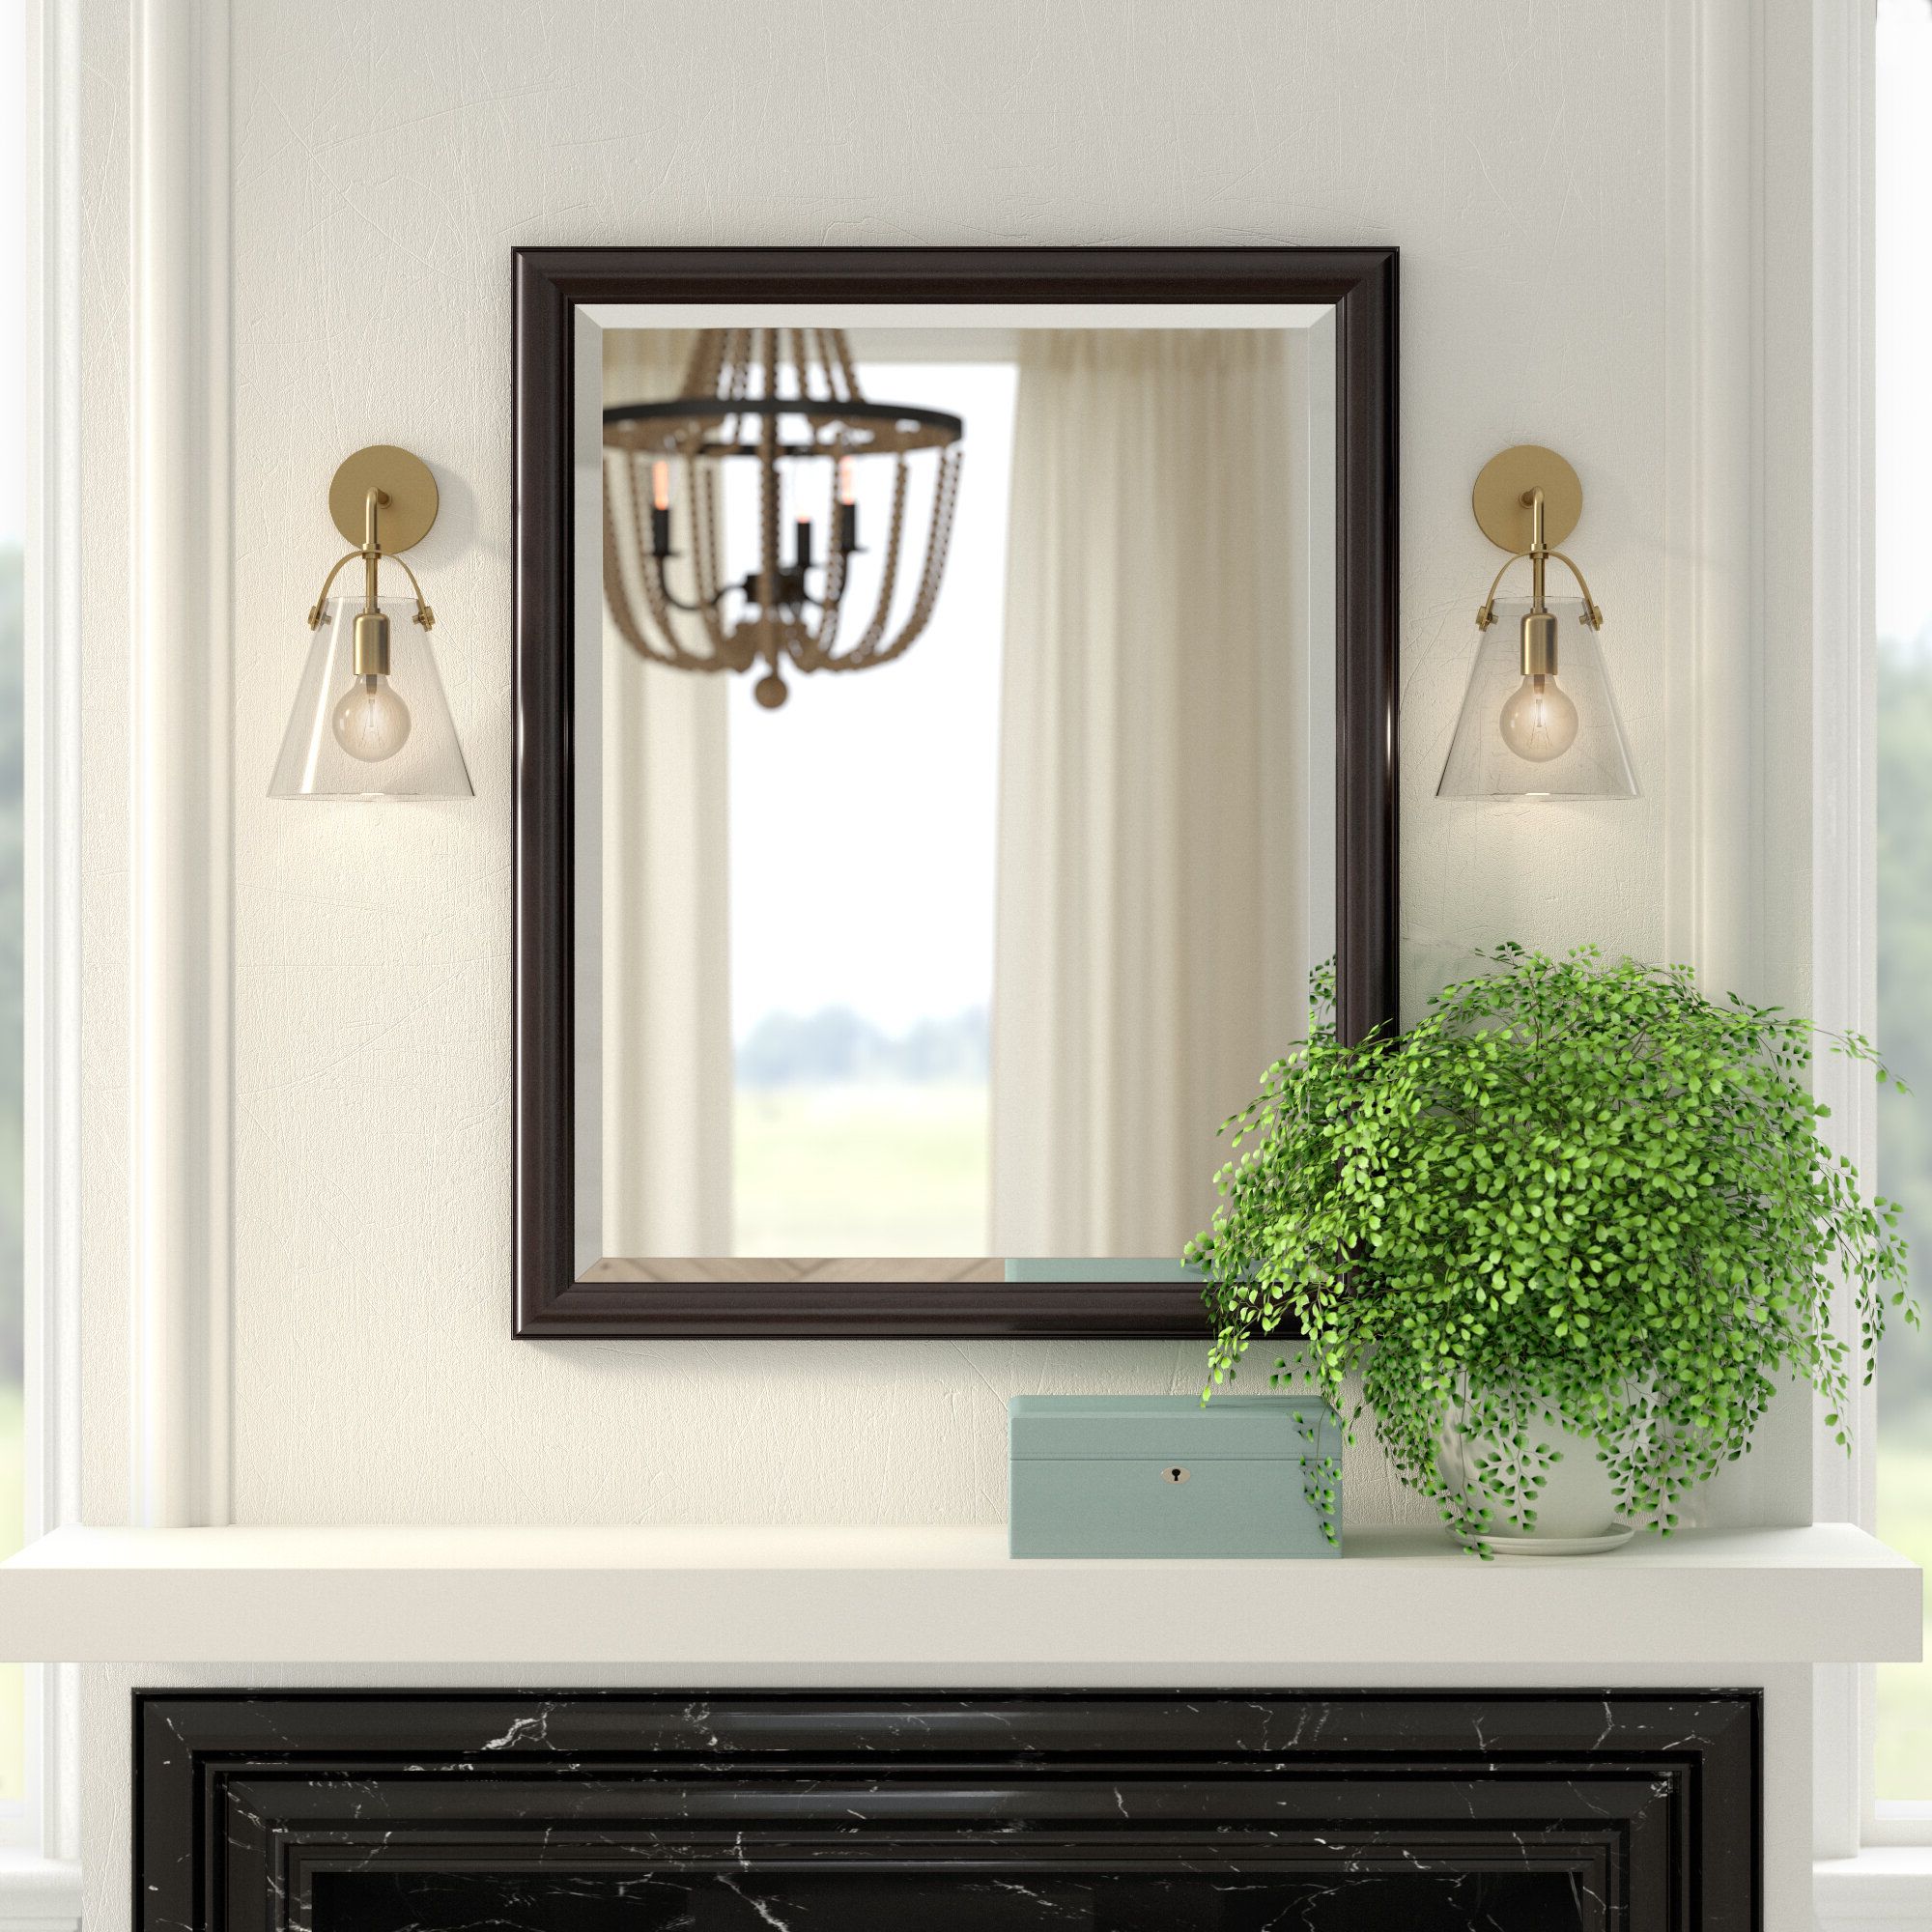 Framed Beveled Wall Mirror Pertaining To Well Liked Rectangle Pewter Beveled Wall Mirrors (View 19 of 20)